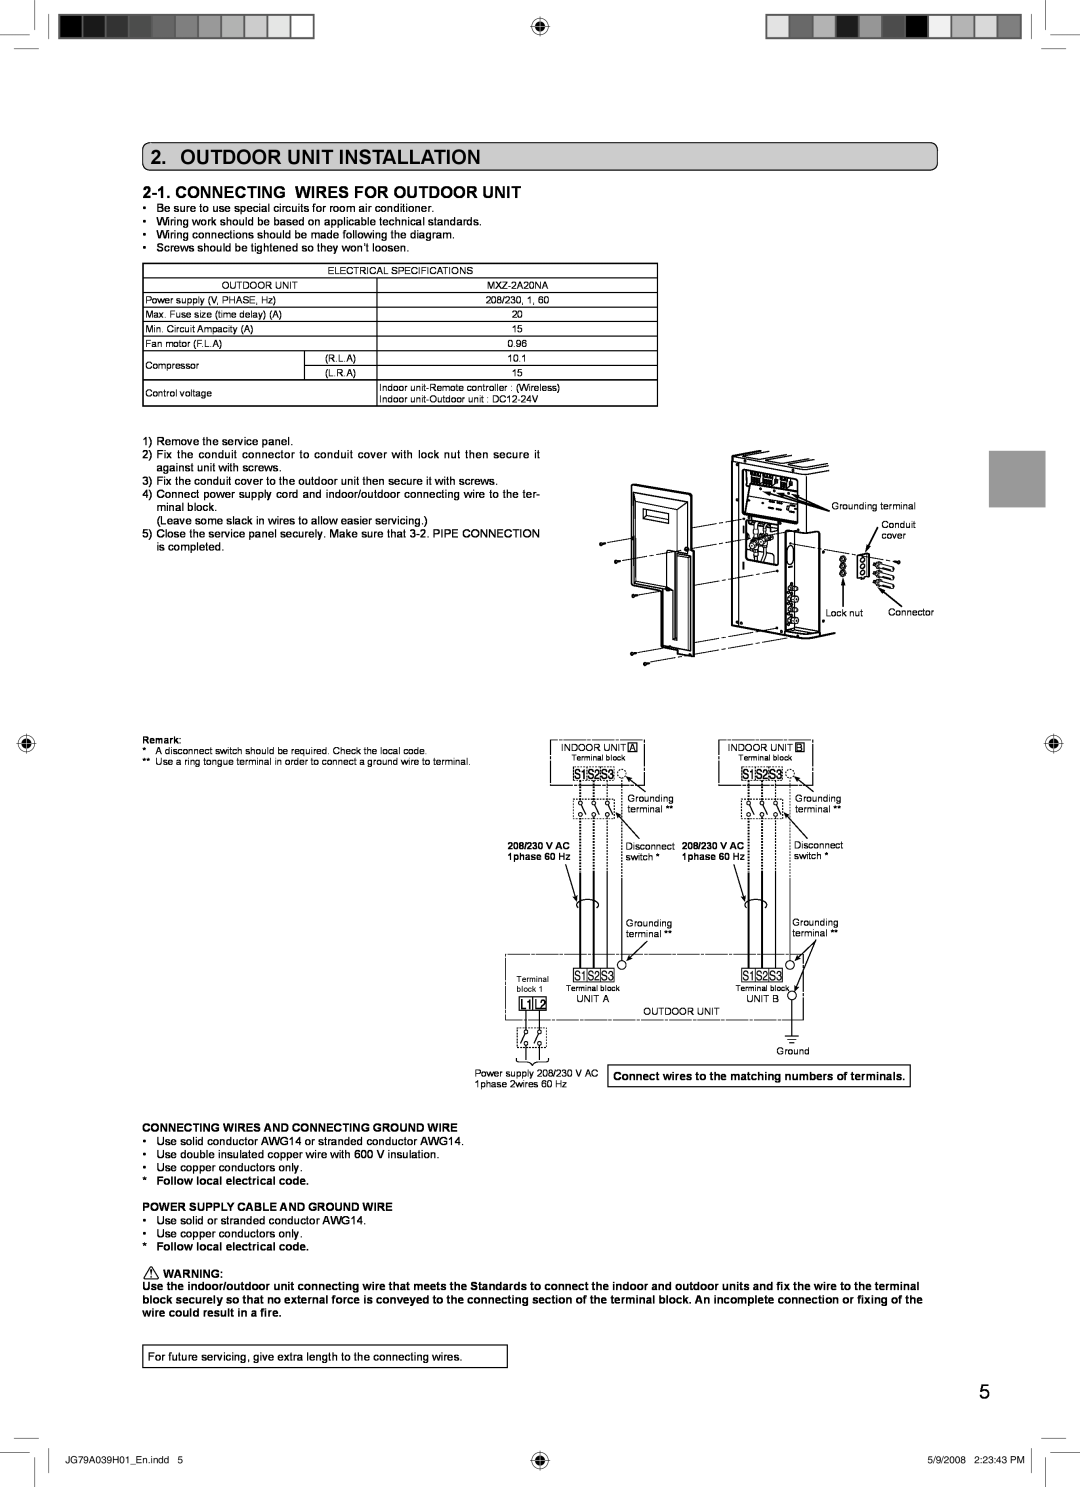 Mitsubishi Electronics MXZ-2A20NA installation manual Outdoor Unit Installation, Connecting Wires For Outdoor Unit 